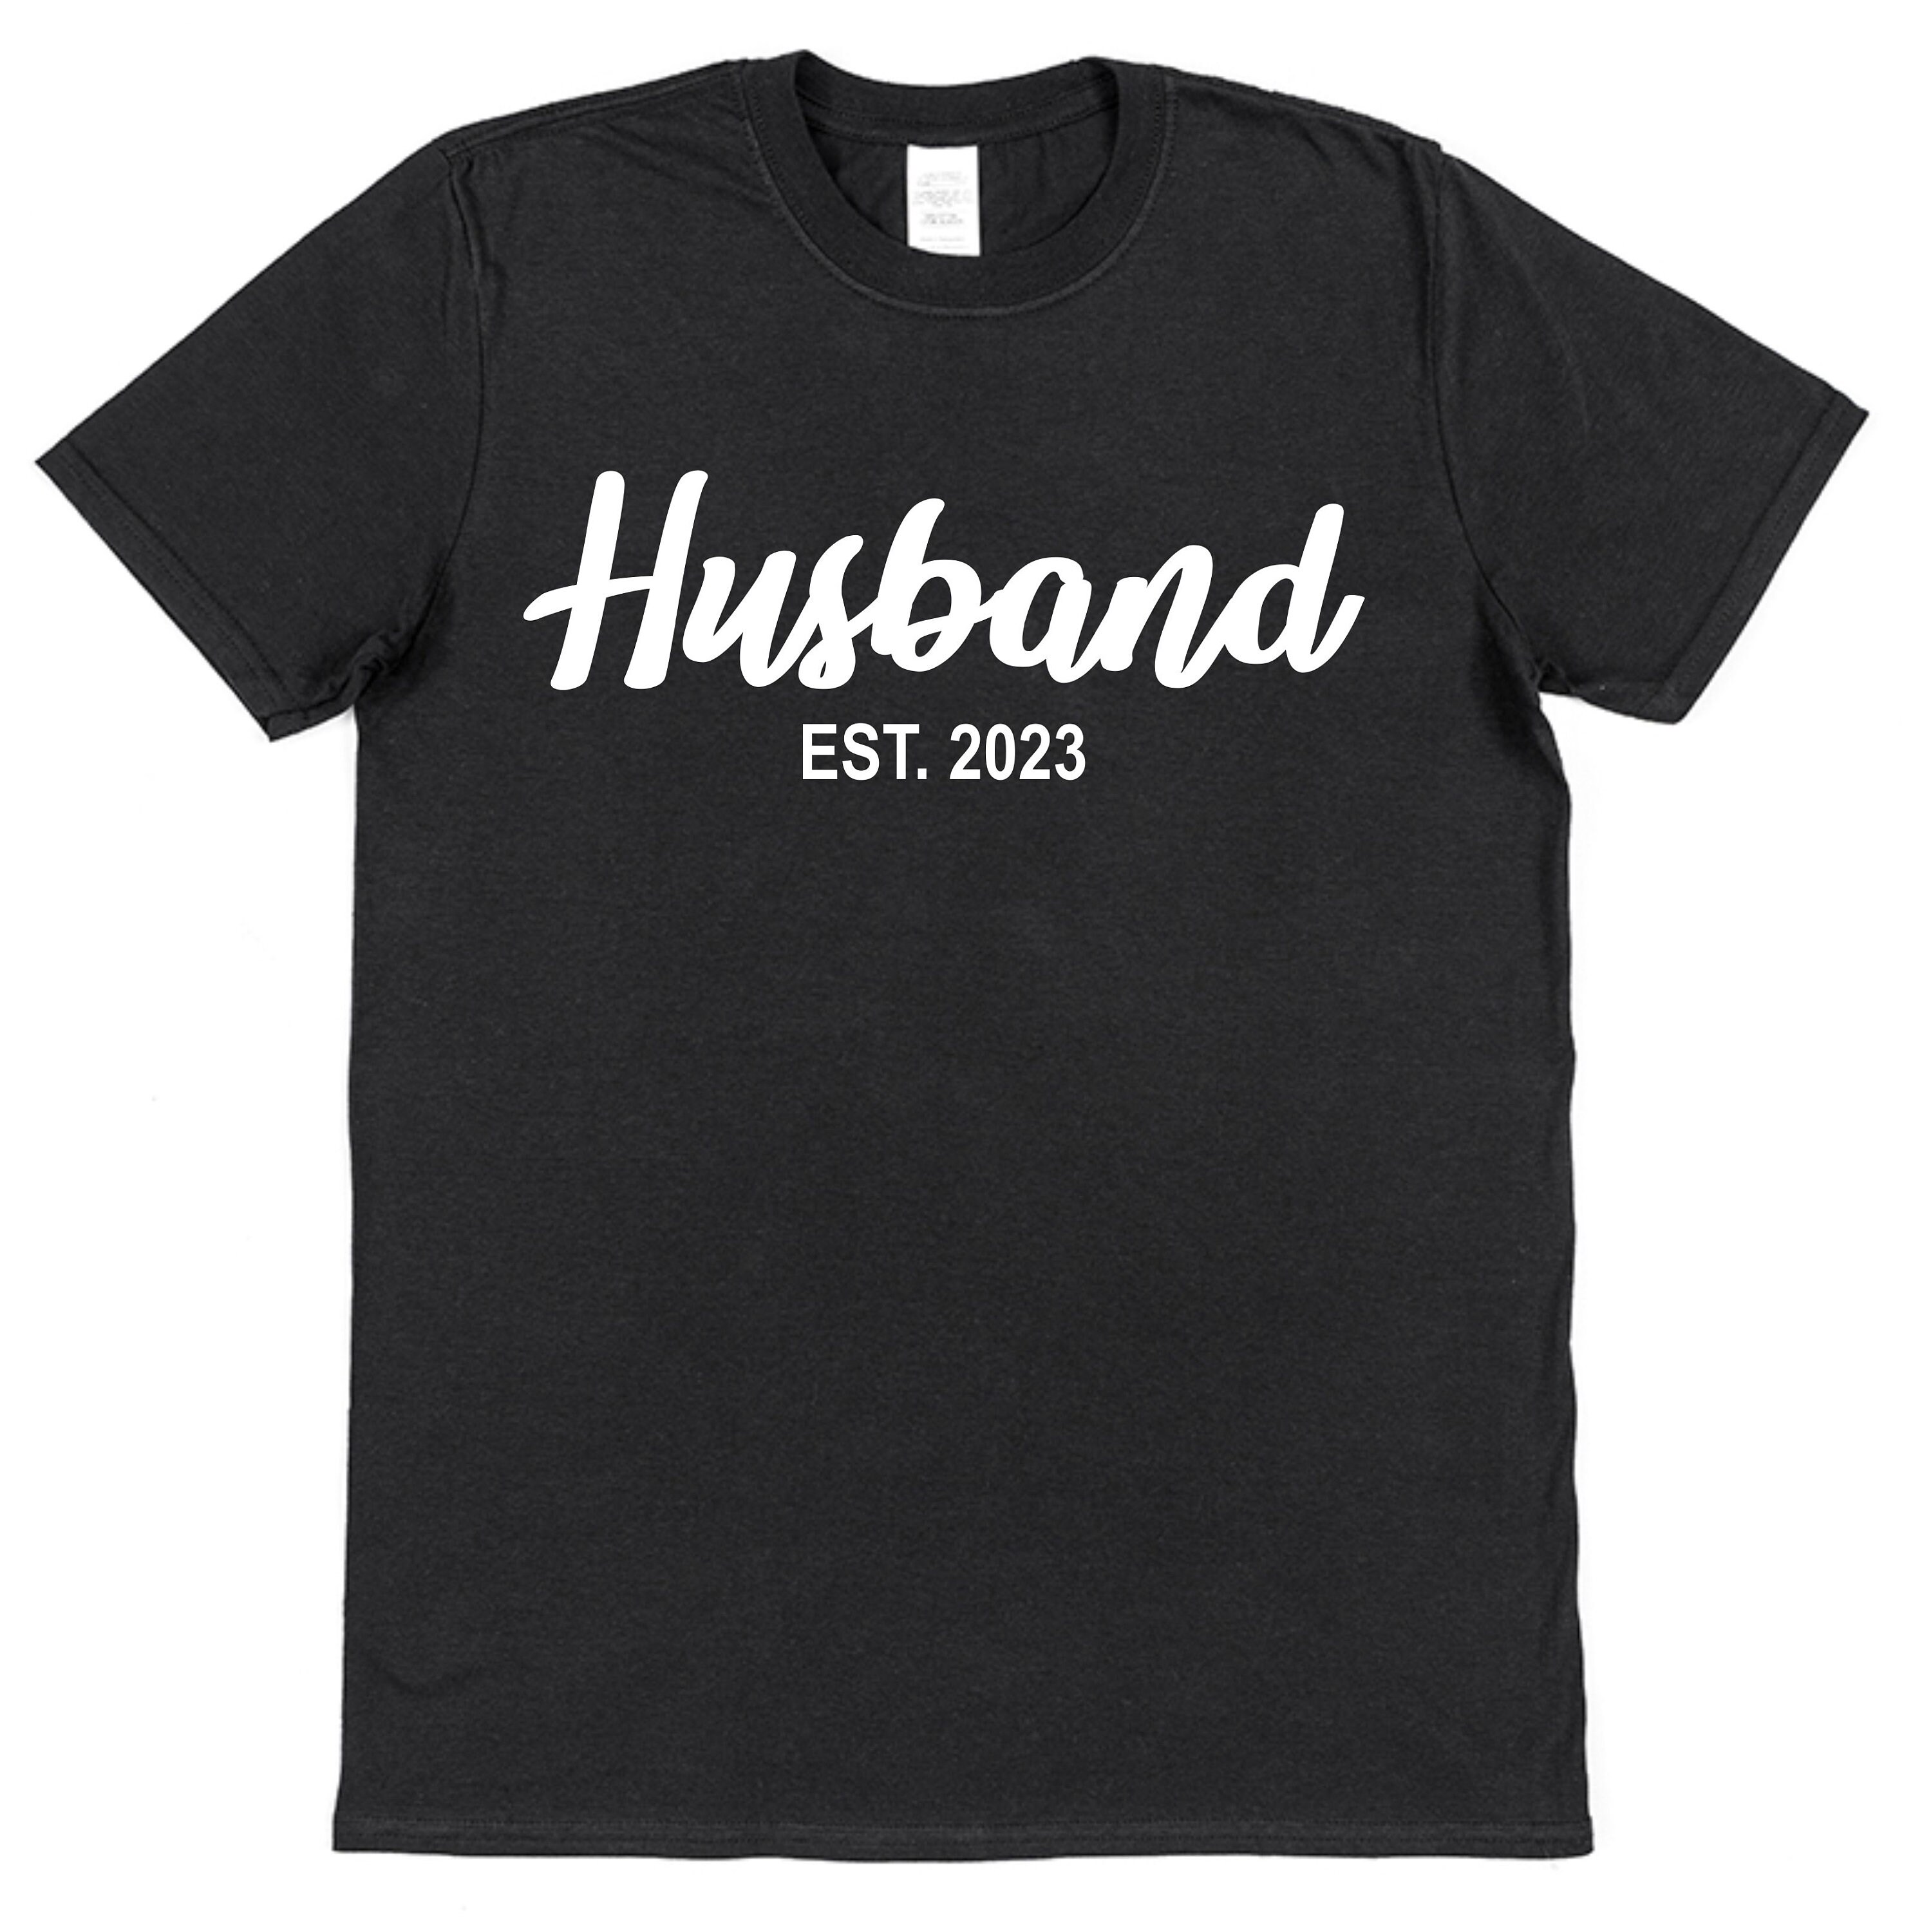 Stag Husband Shirt image picture